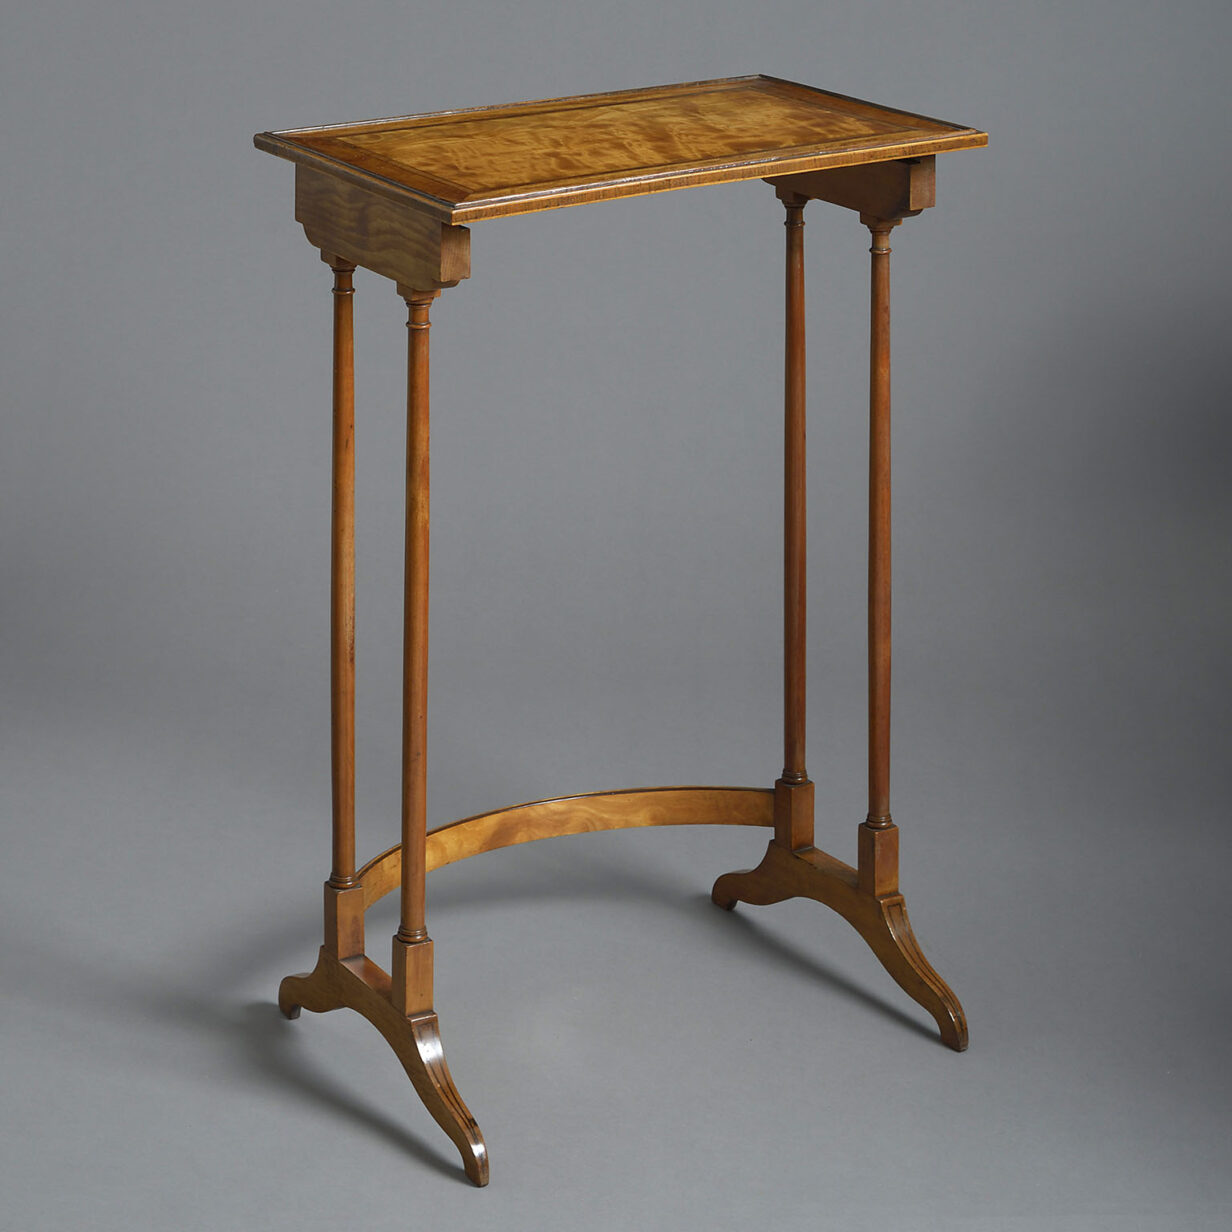 Late 18th century george iii sheraton period nest of satinwood tables